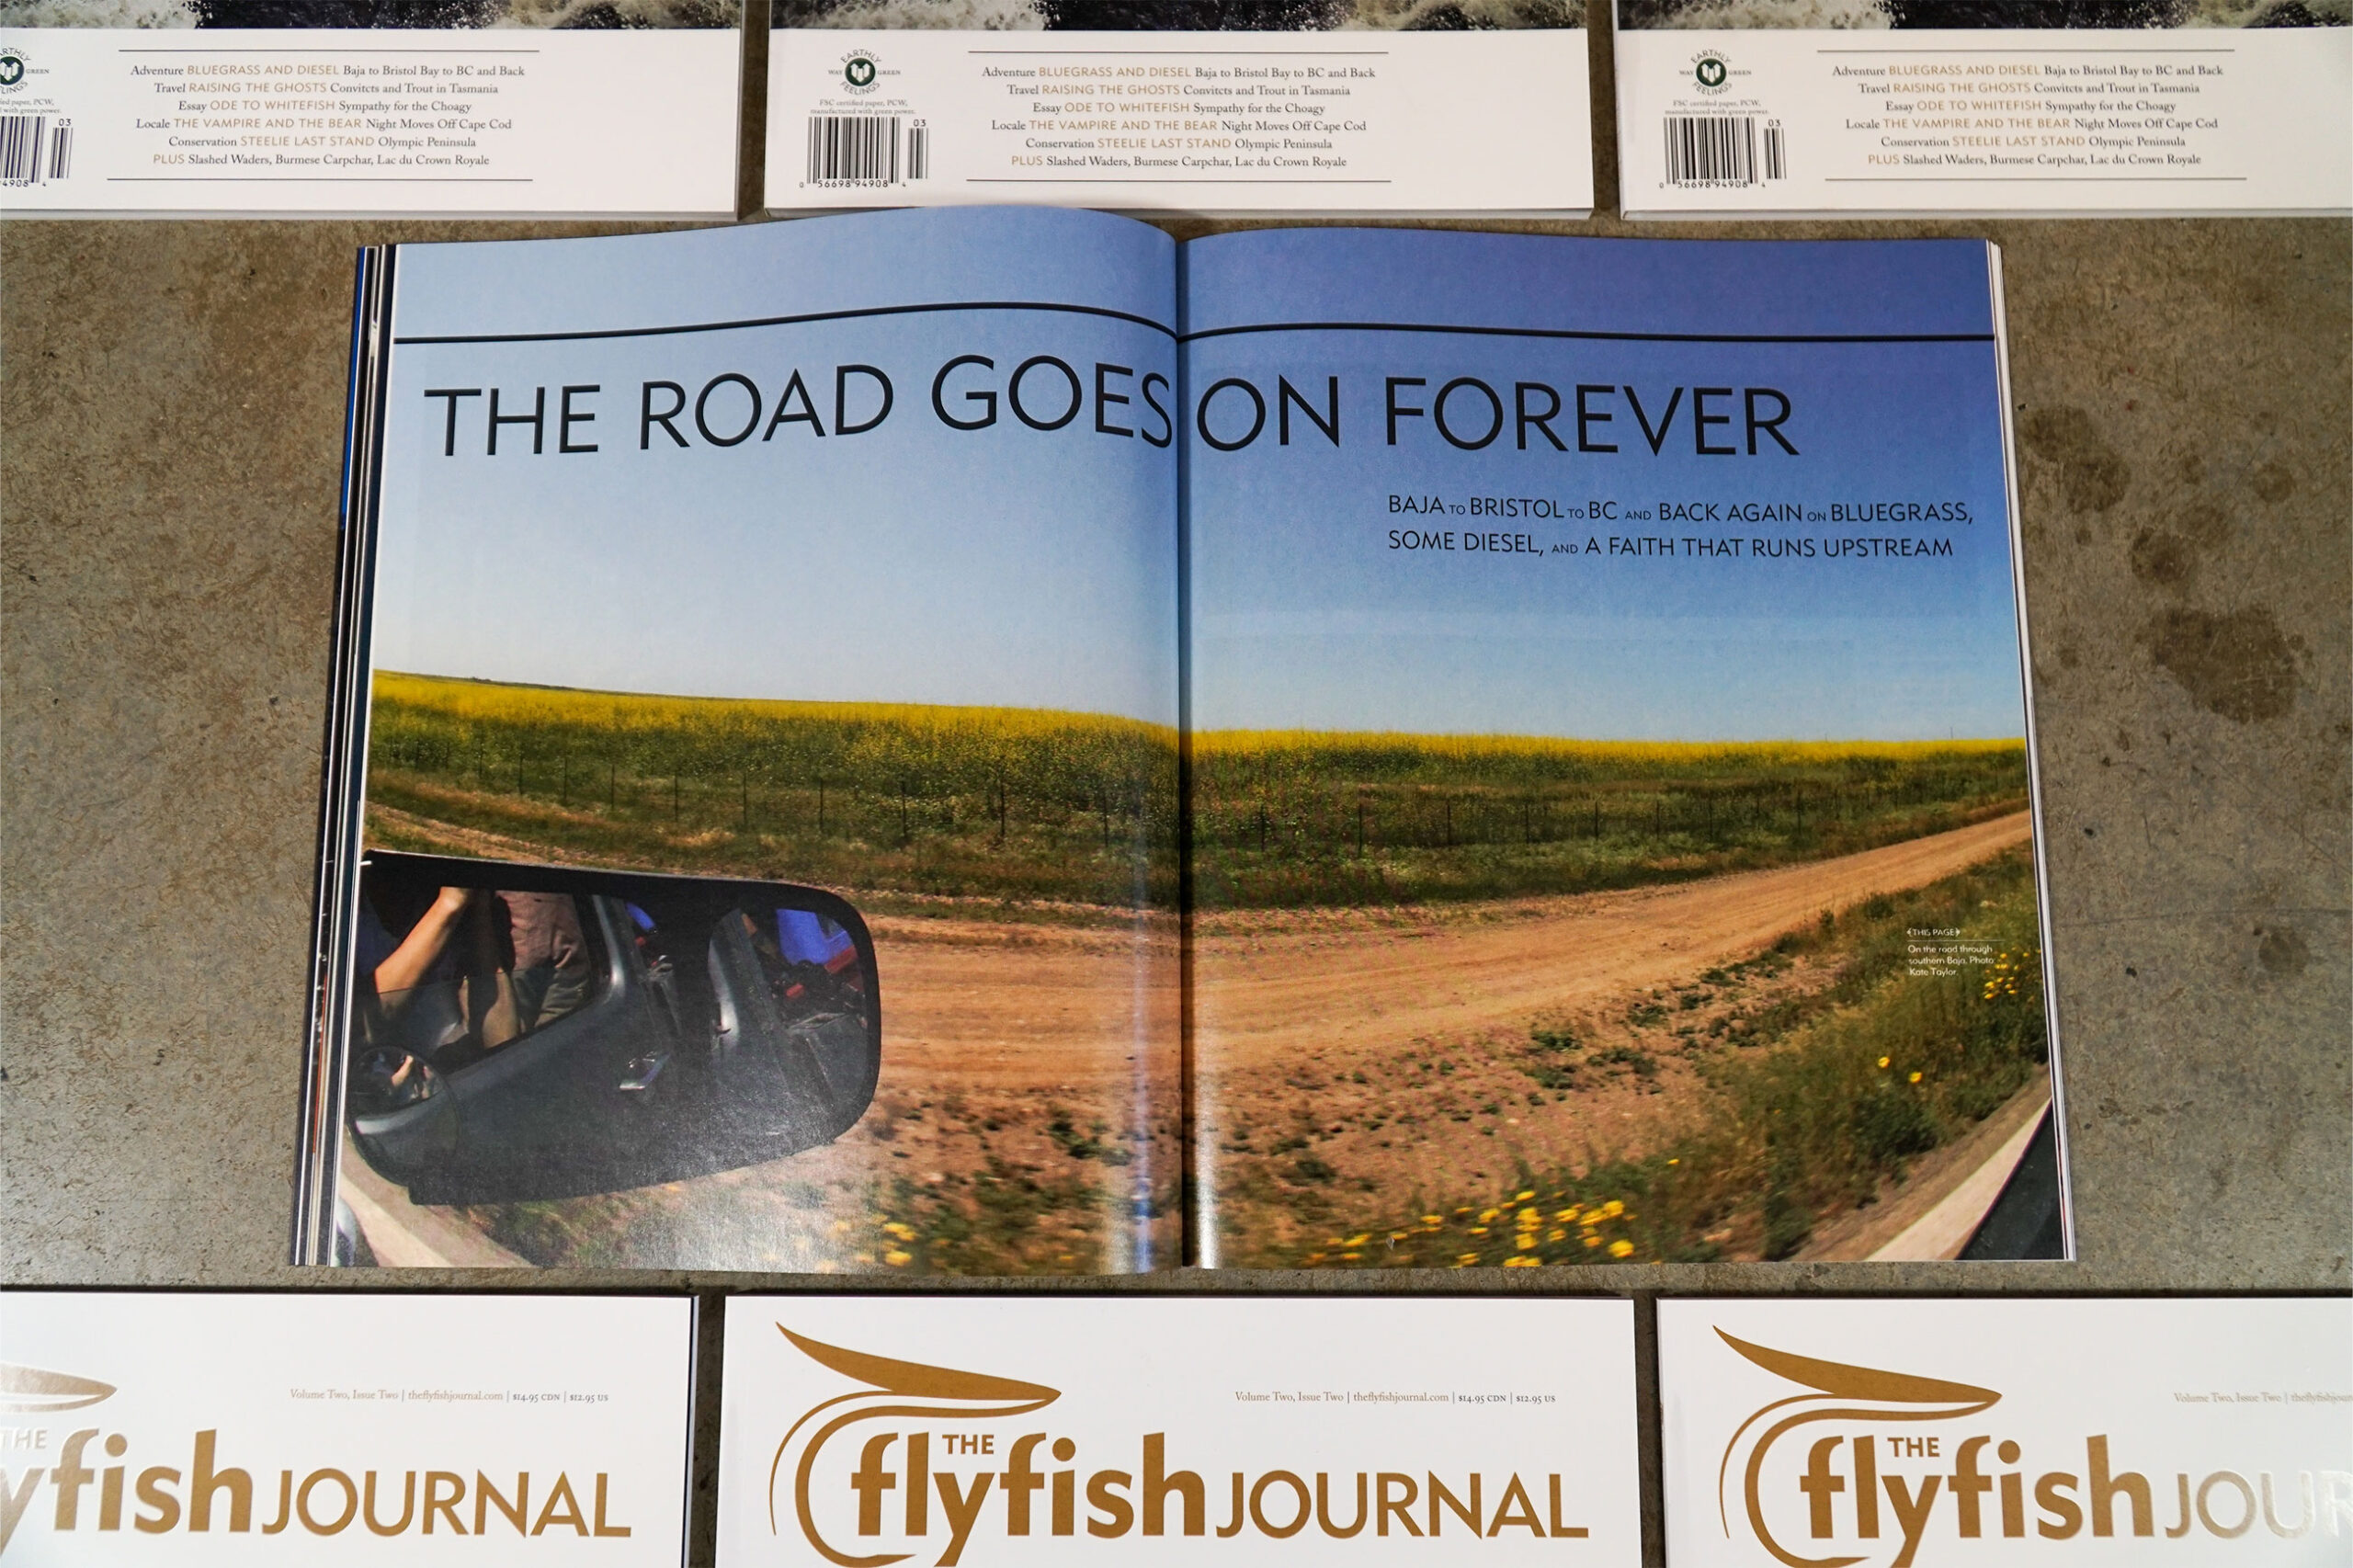 The Flyfish Journal Volume 2 Issue 2 Feature The Road Goes on Forever